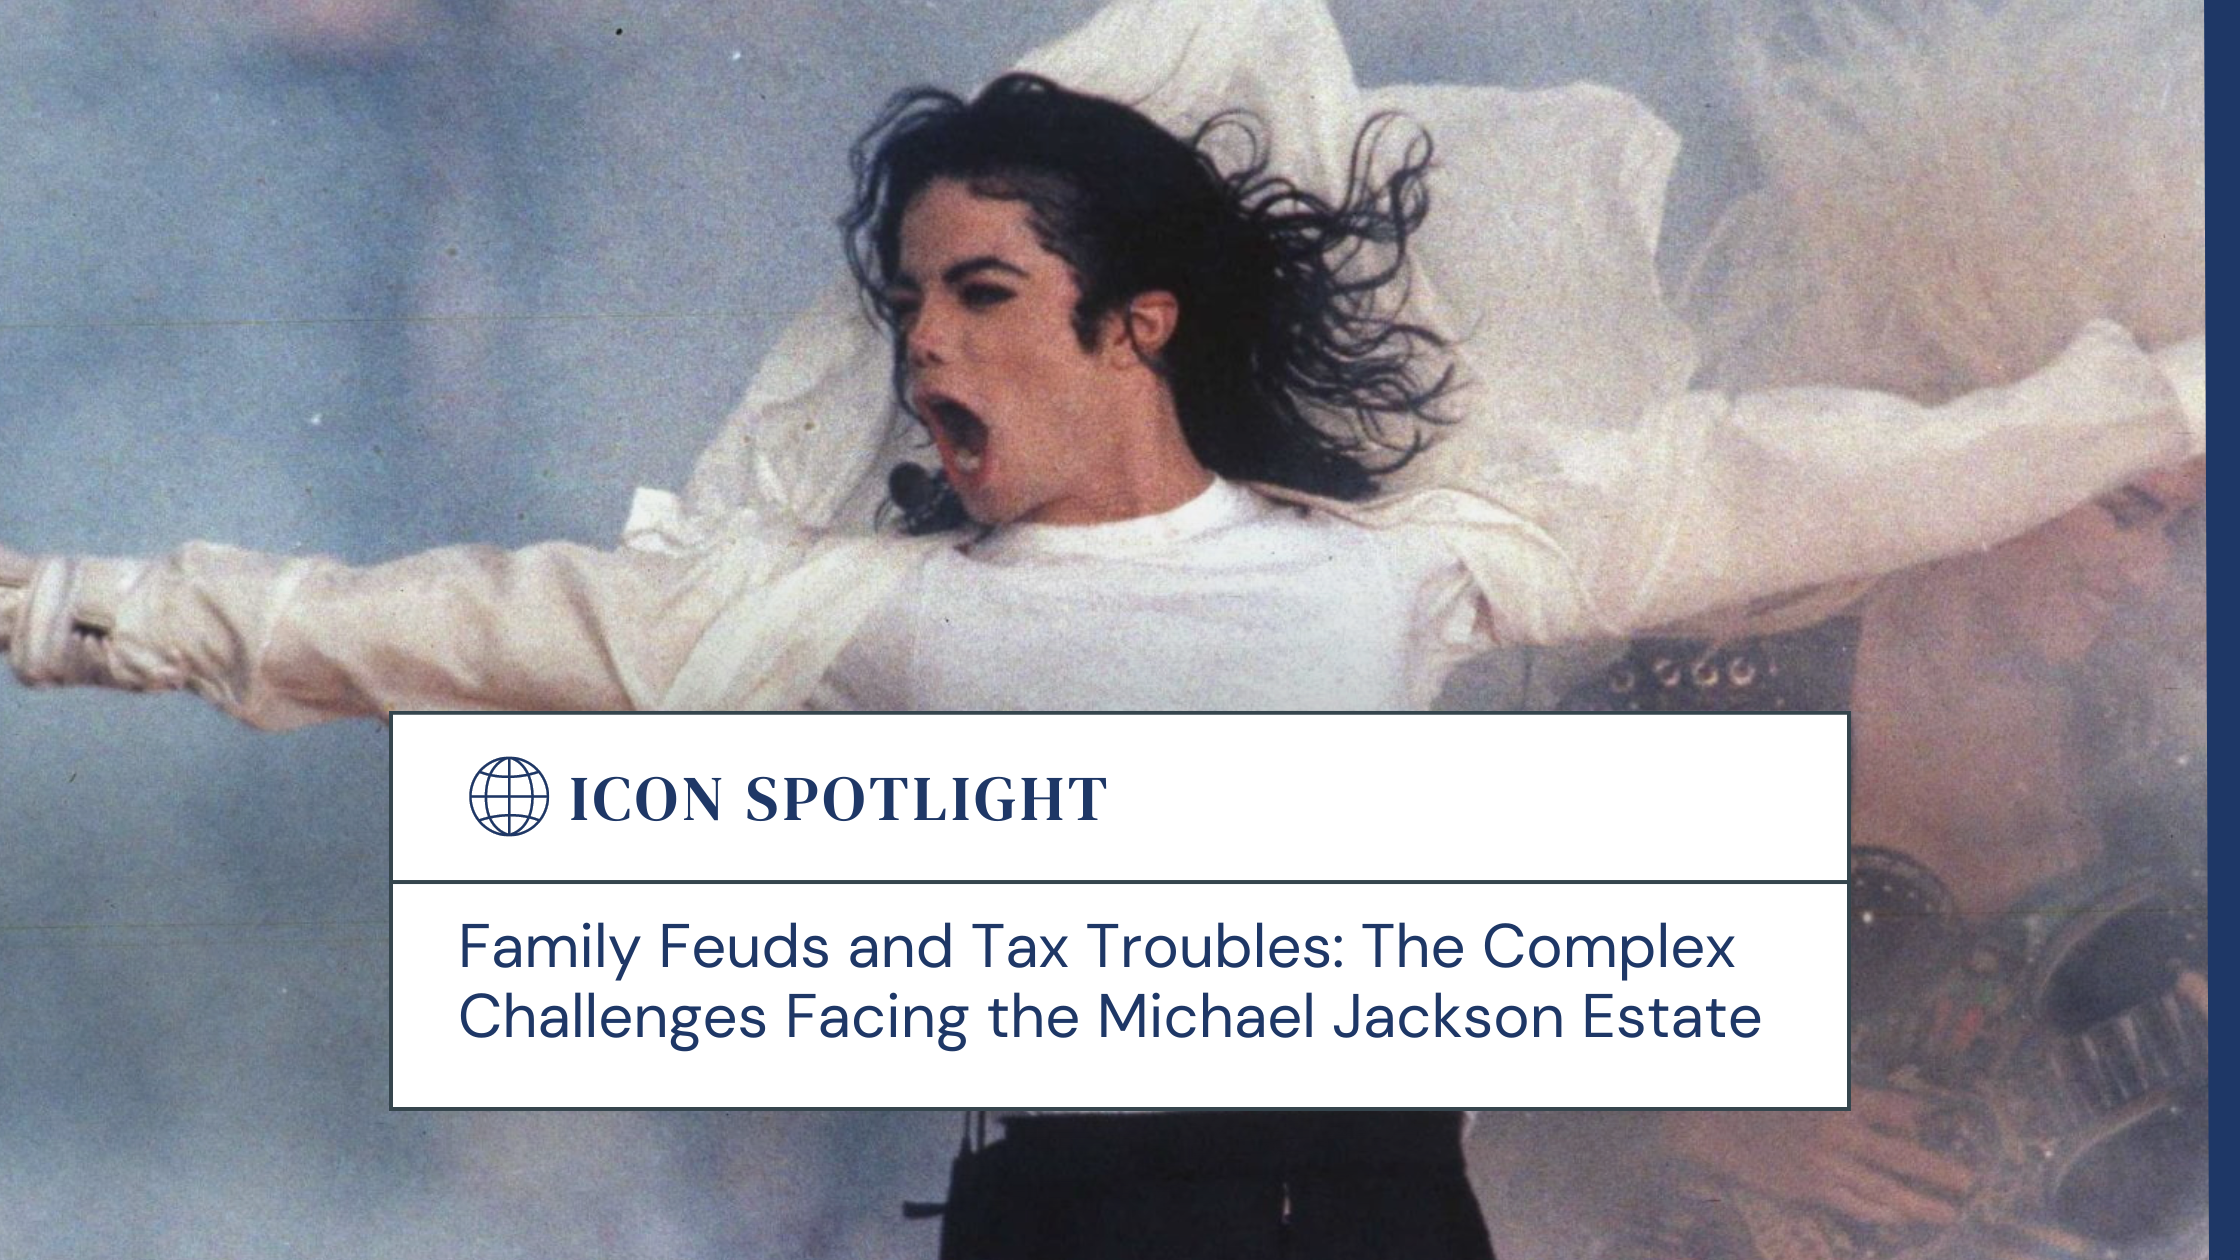 Michael Jackson's estate is currently locked in a battle with the IRS over a dispute regarding the value of his assets. This is proving to be a very “Bad” situation for many of his family members, including his mother Katherine, and his three children, Paris, Prince, and Bigi